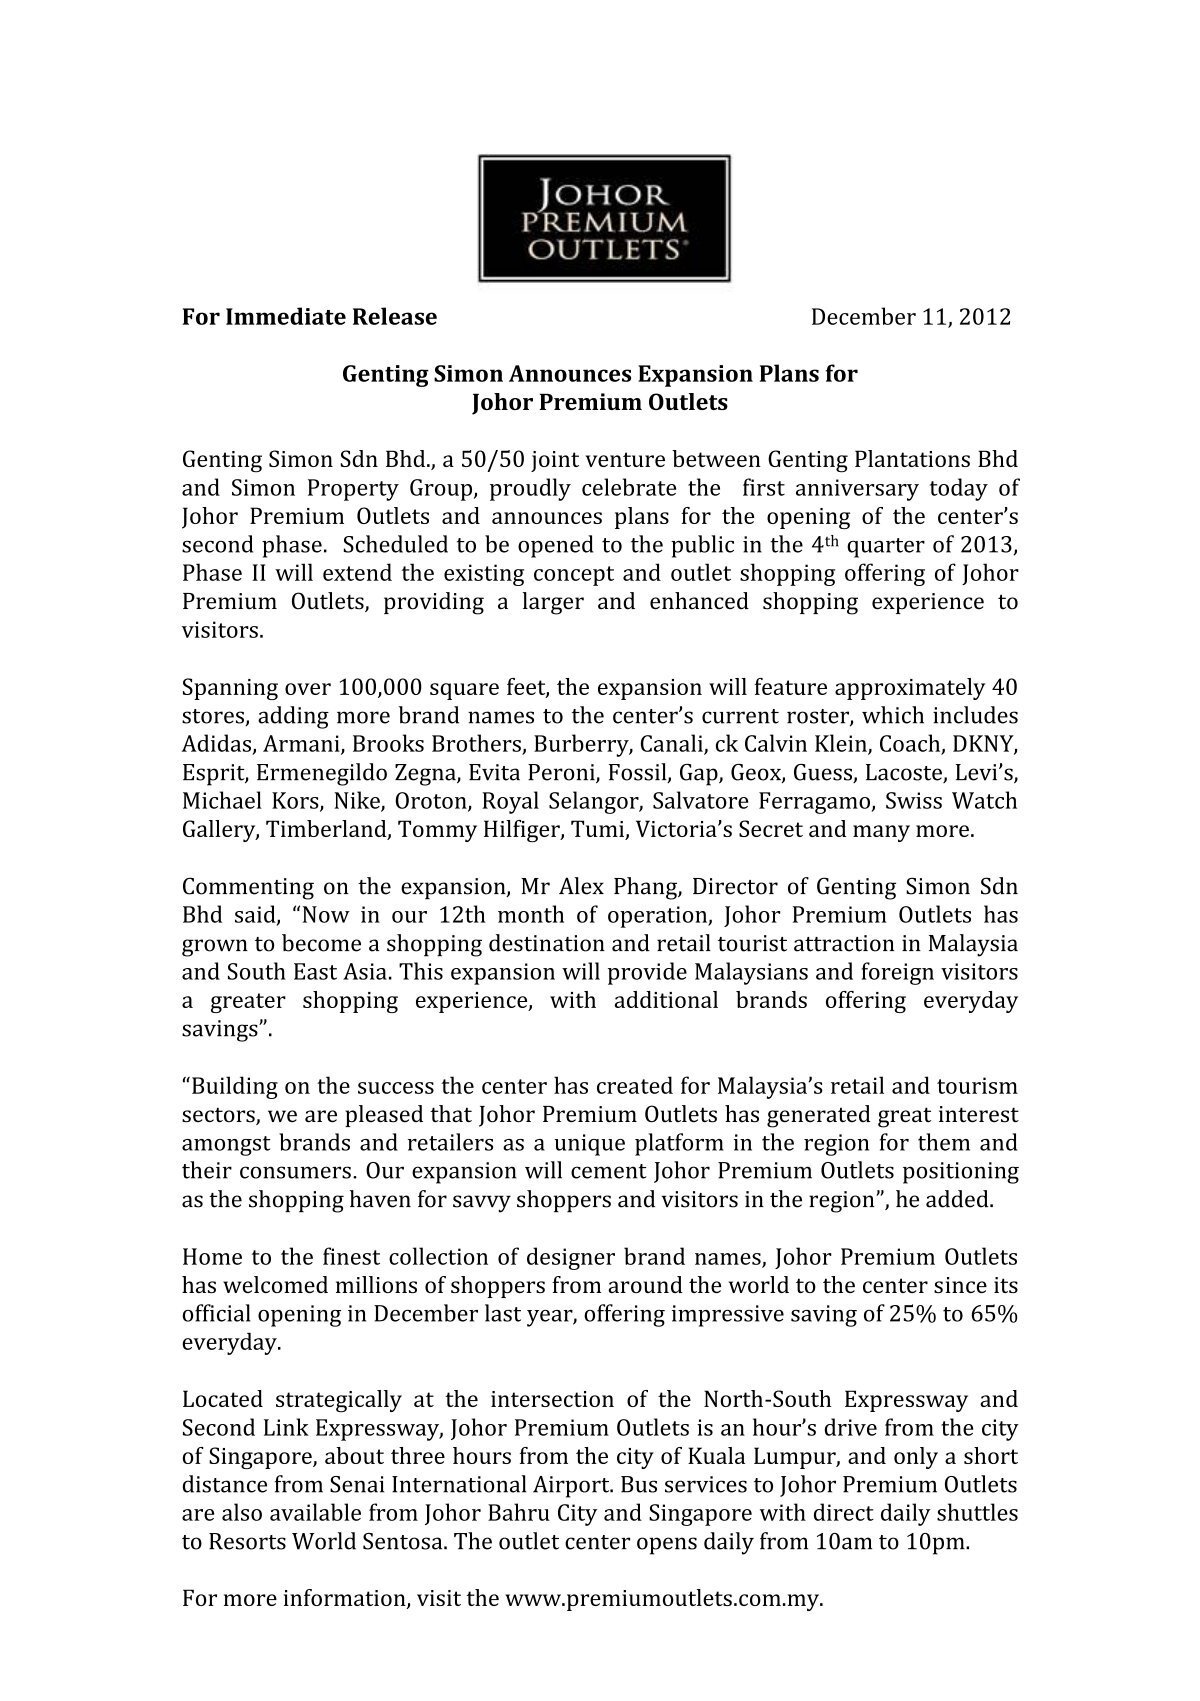 Press Release - Genting Group